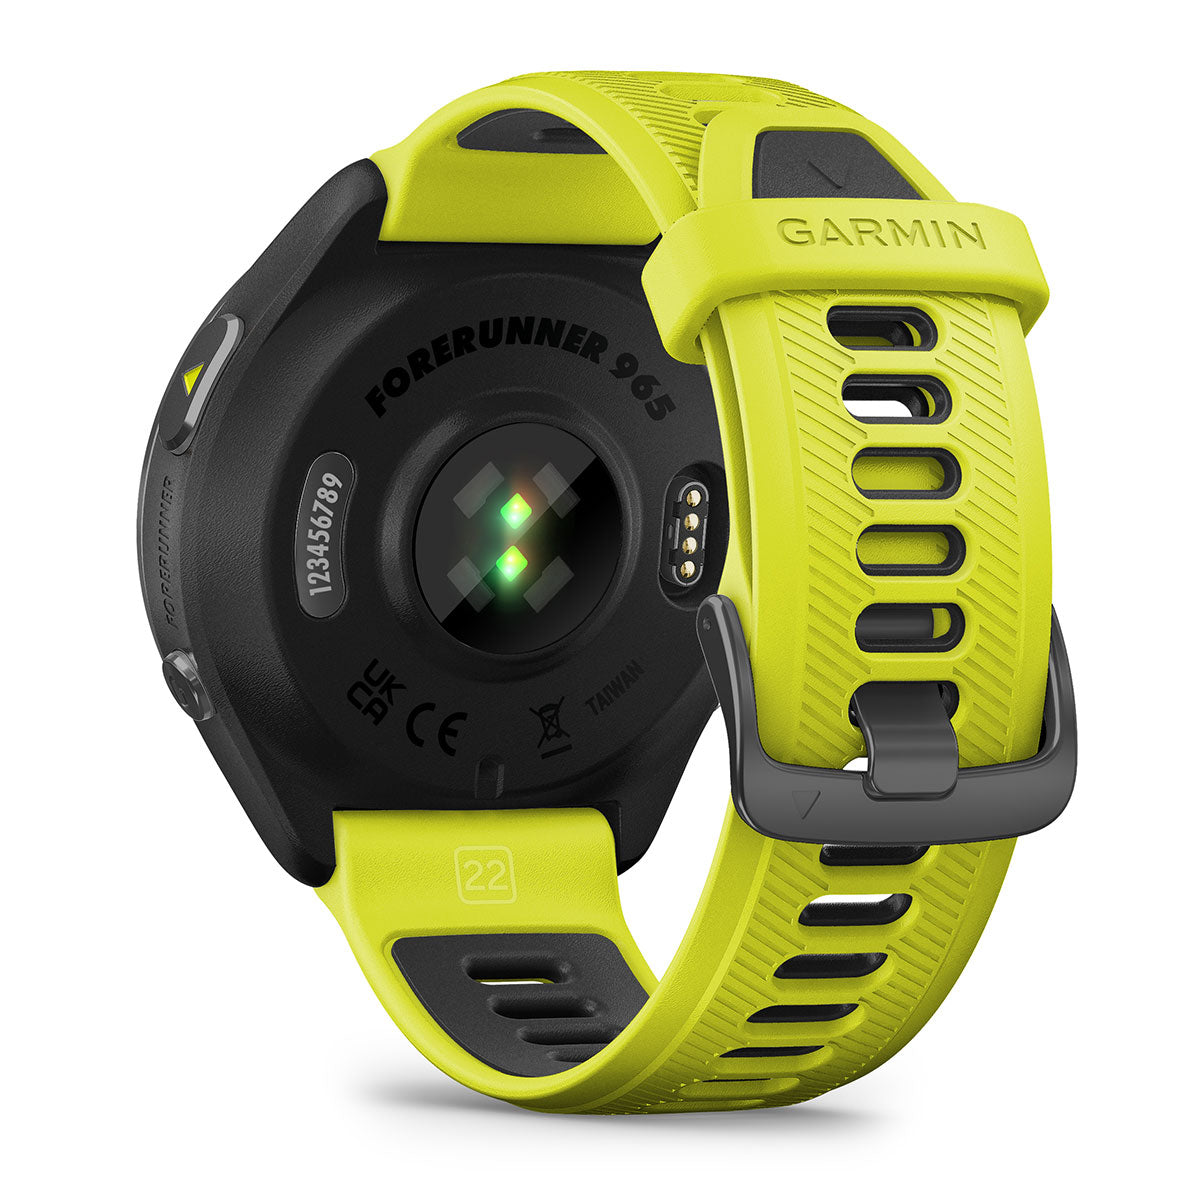 Garmin Forerunner 965 (Amp Yellow/Black) Premium Running & Triathlon GPS Smartwatch | Bundle with PlayBetter Screen Protectors & Portable Charger - image 4 of 7